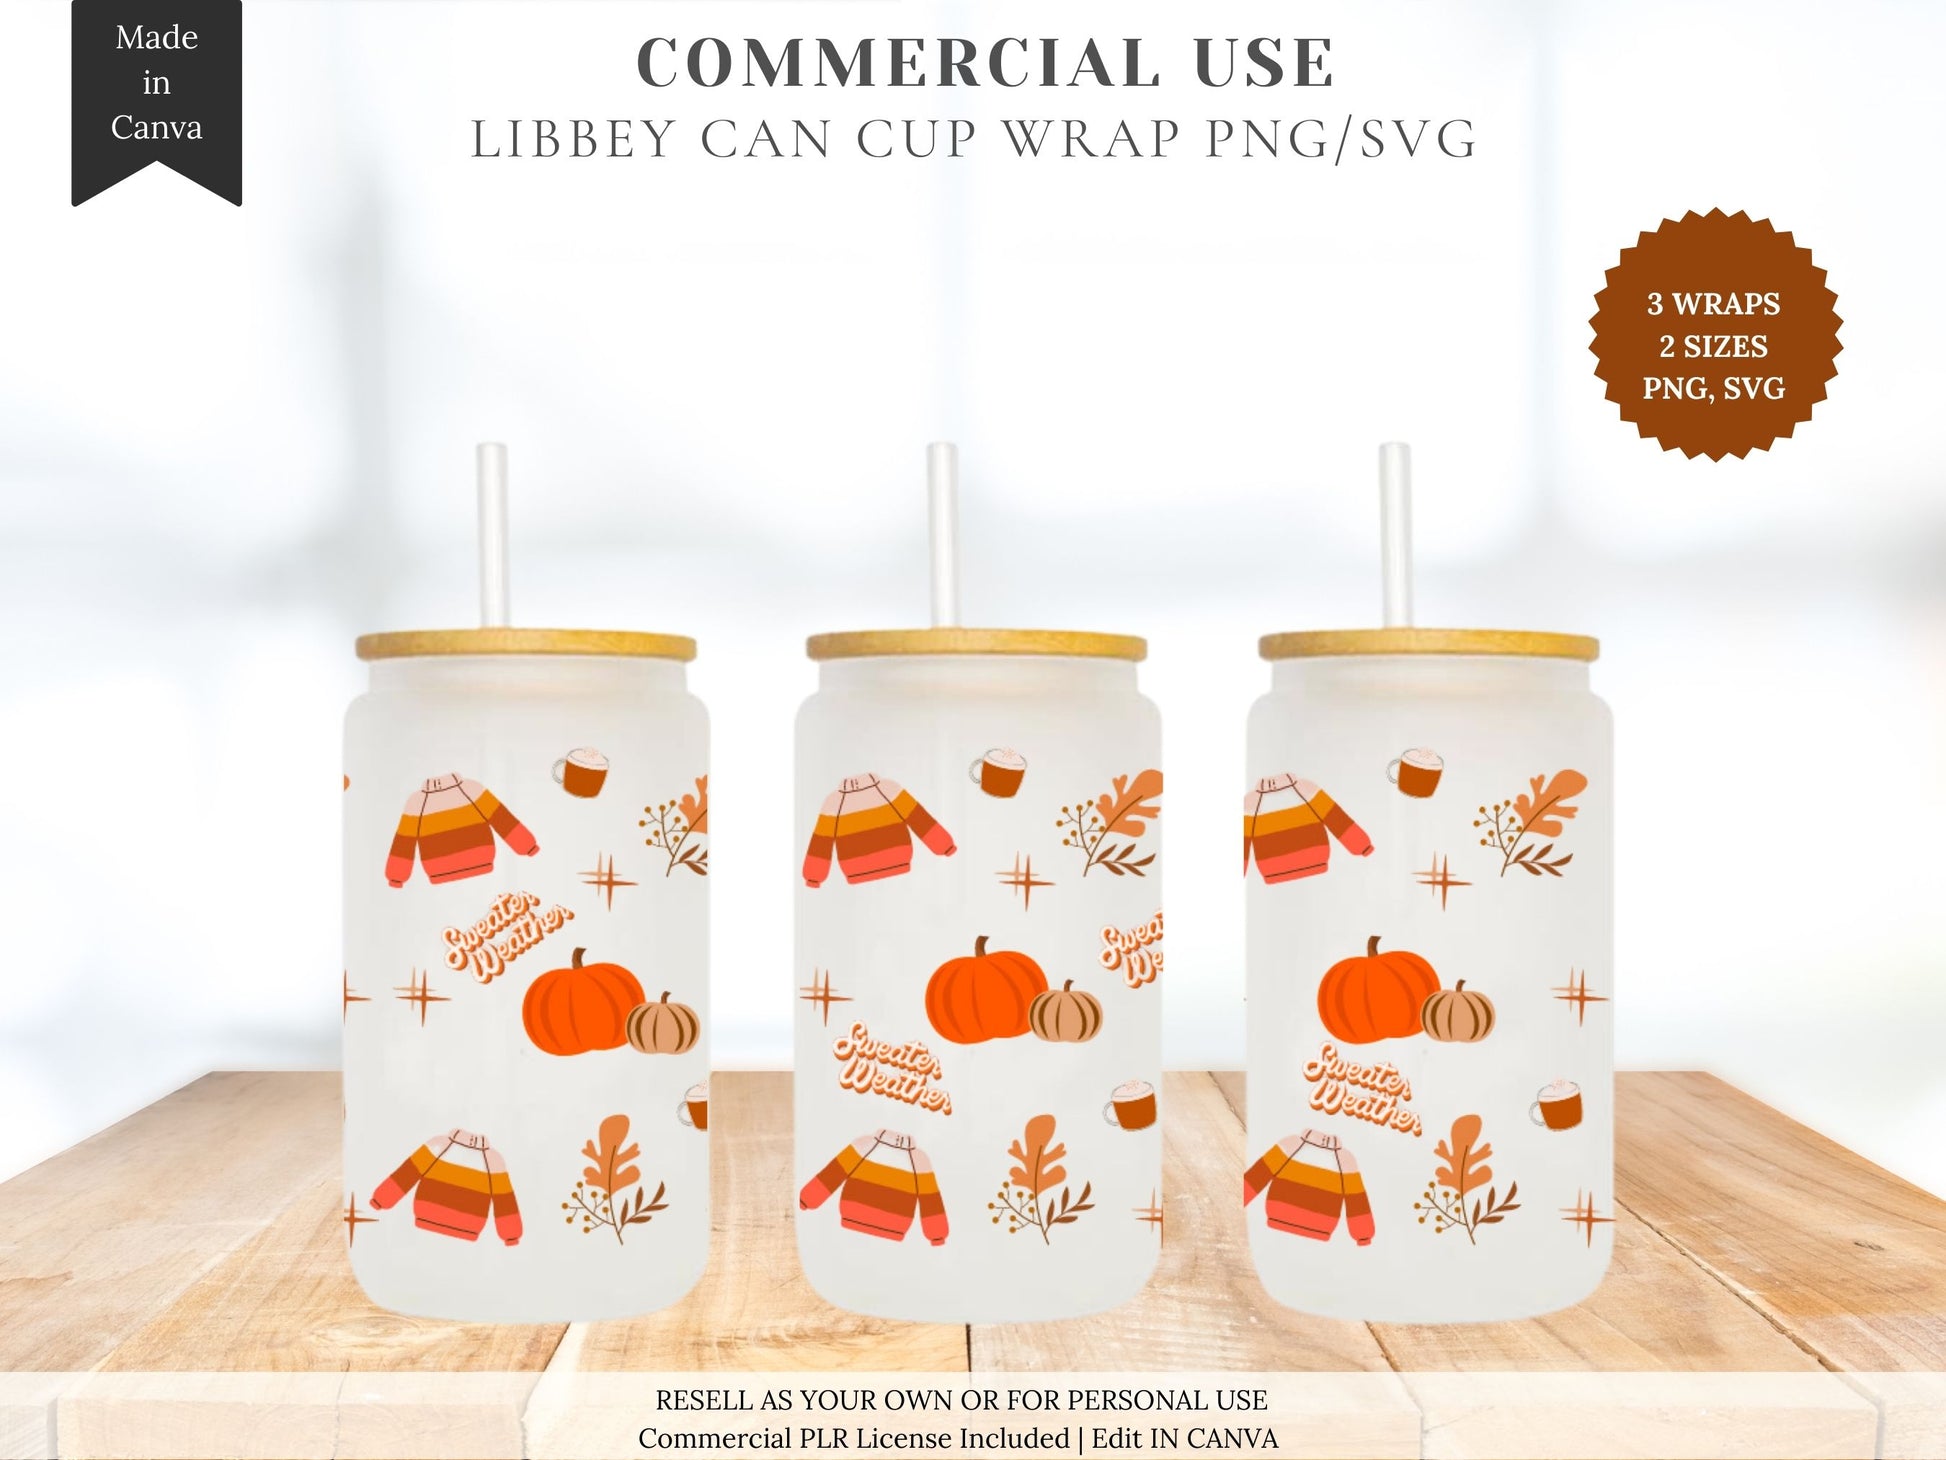 Libbey can glass 16 oz tumbler template - So Fontsy